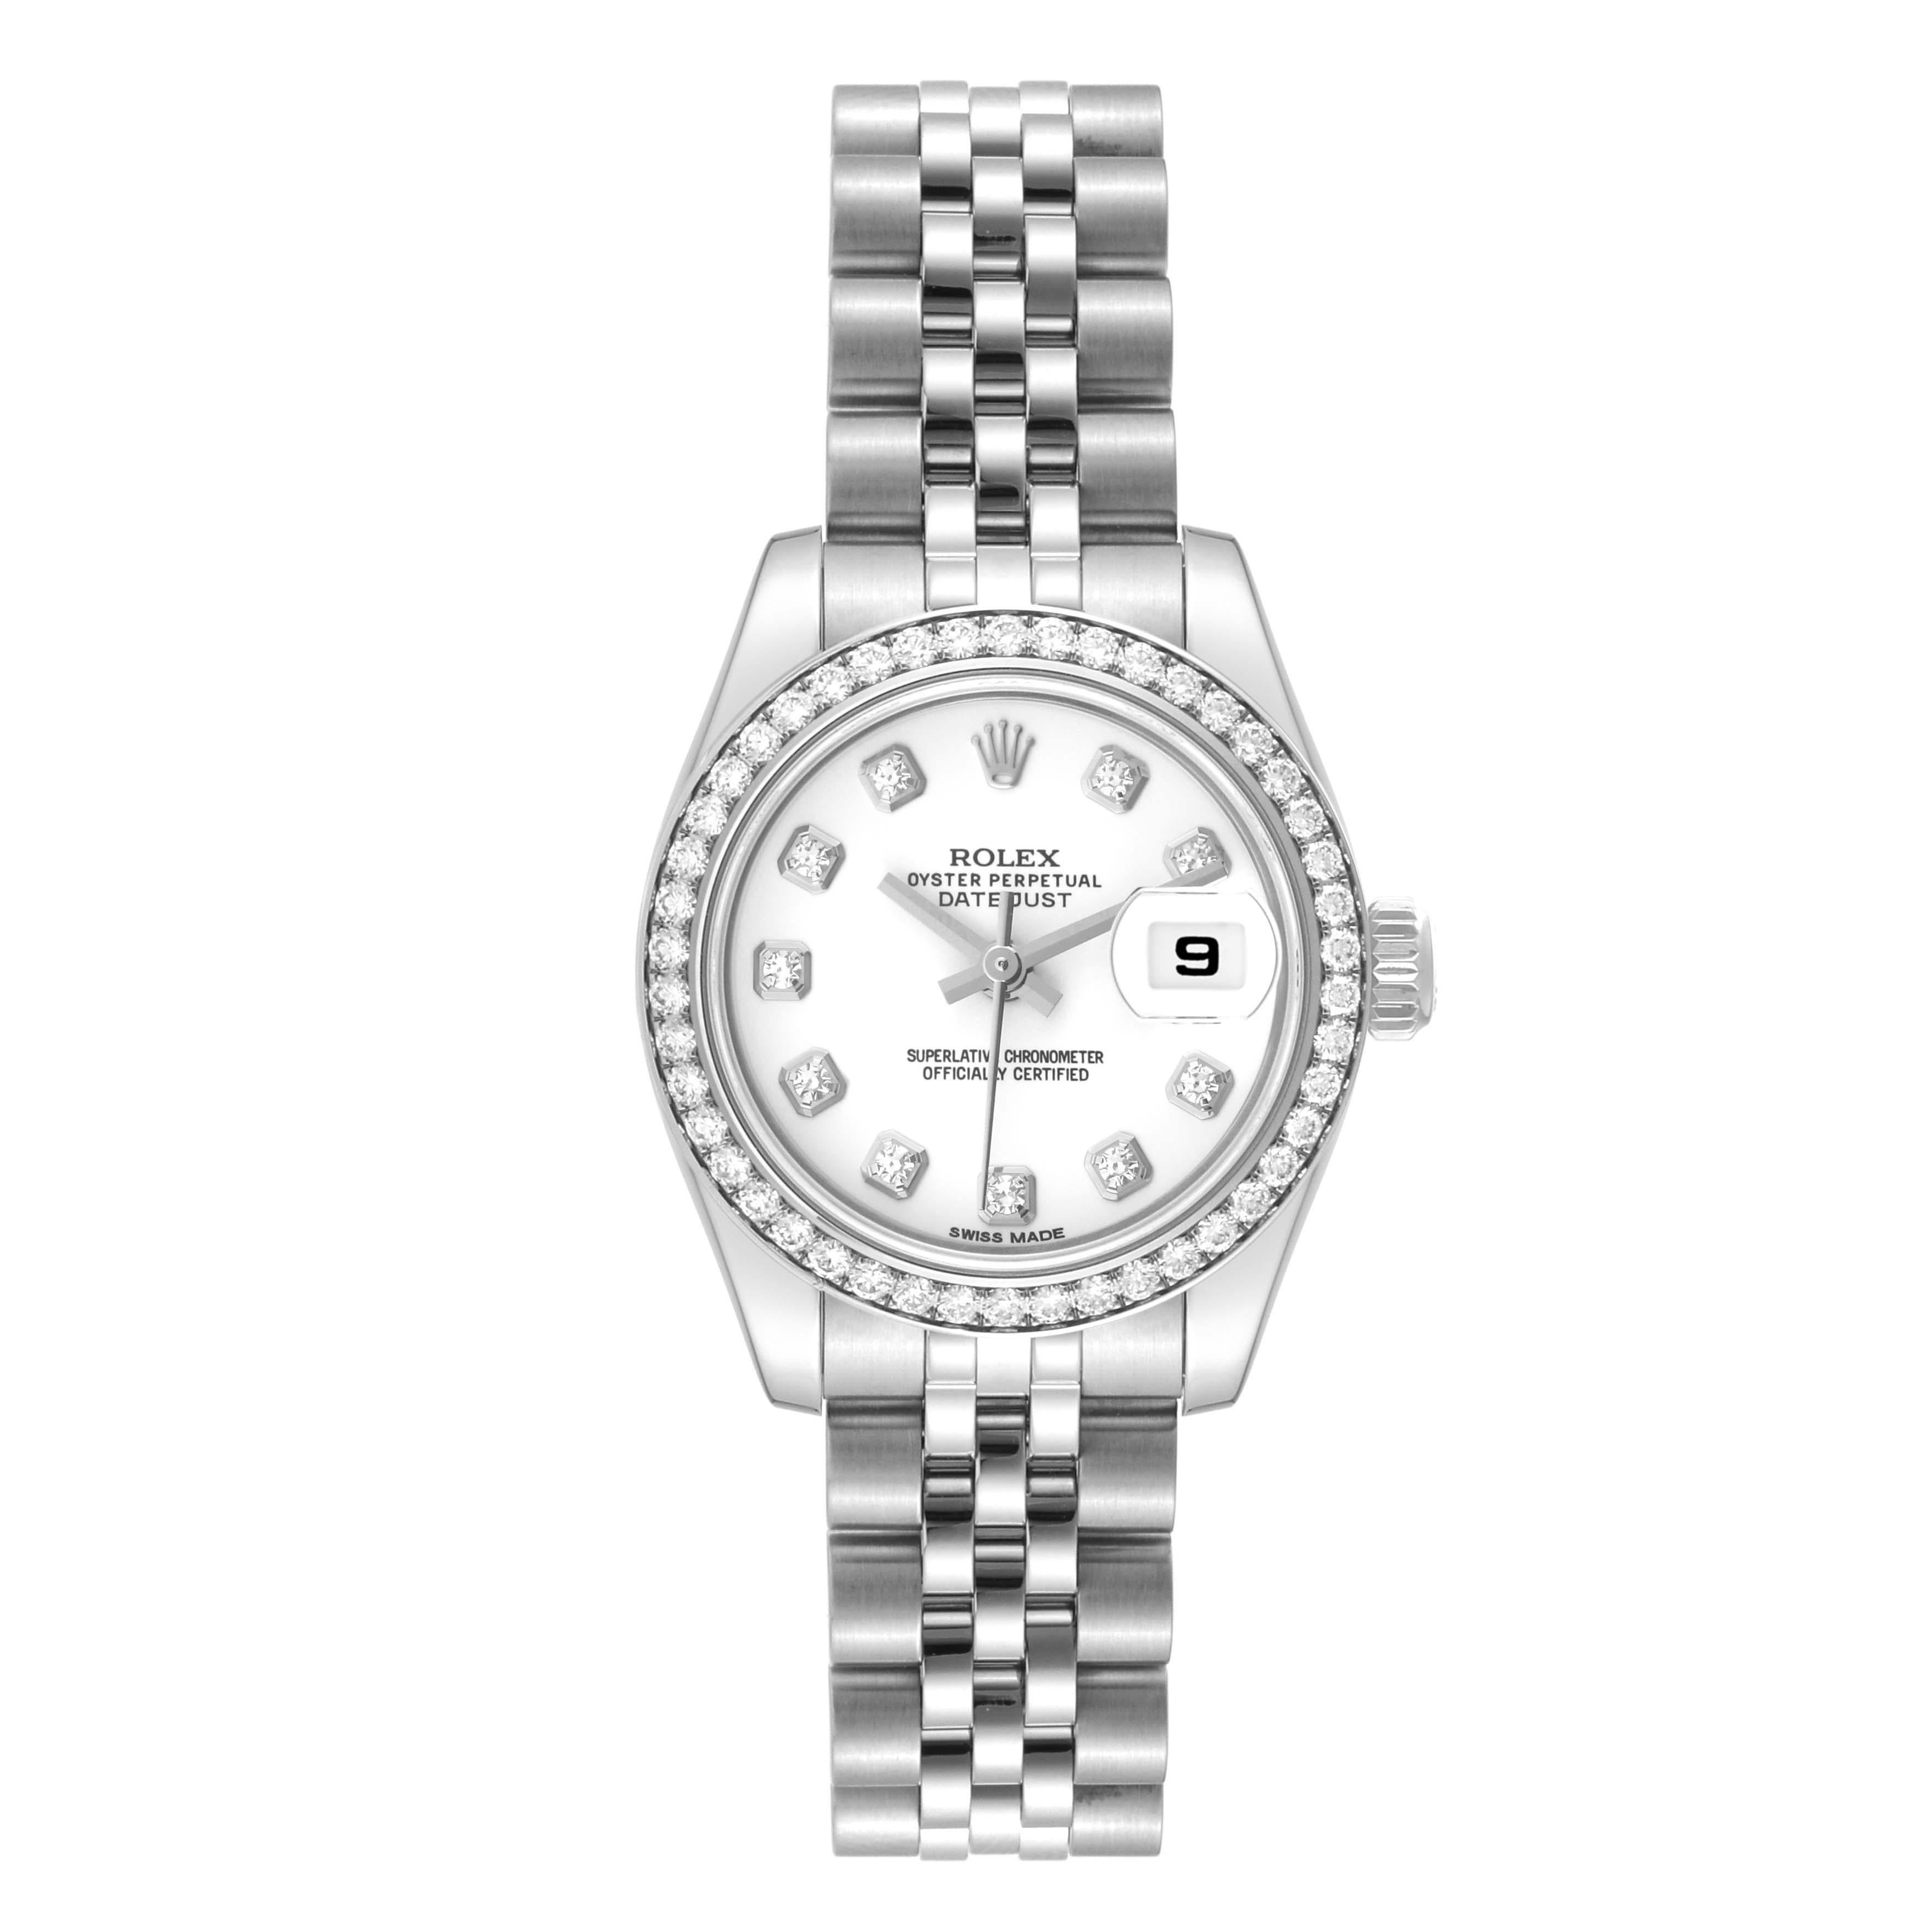 Rolex Datejust 26 Steel White Gold Diamond Ladies Watch 179384 Box Card. Officially certified chronometer automatic self-winding movement. Stainless steel oyster case 26.0 mm in diameter. Rolex logo on crown. 18k white gold original Rolex factory